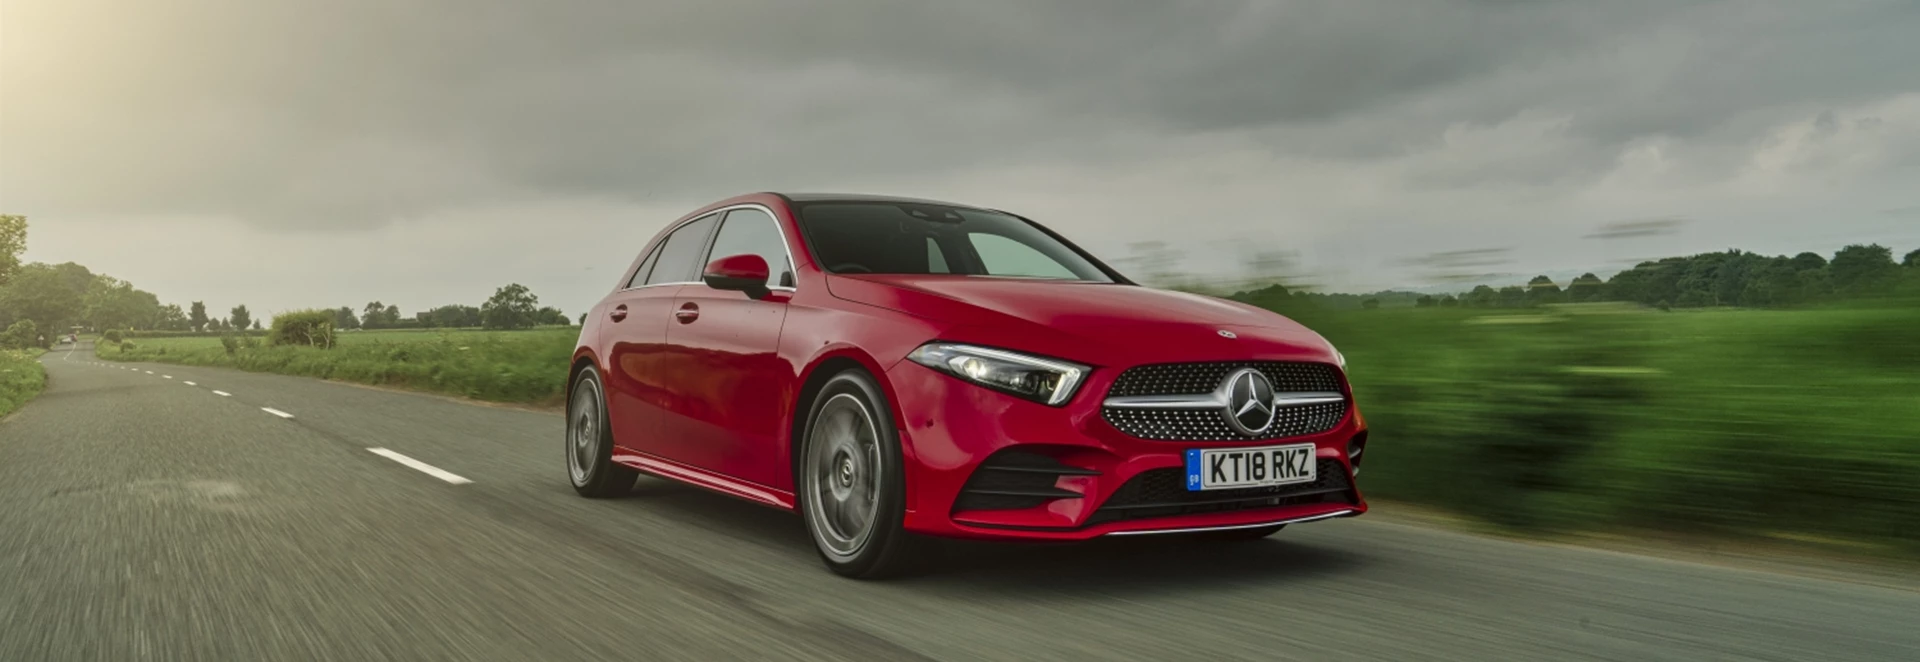 5 Best new cars for £30,000 or less 